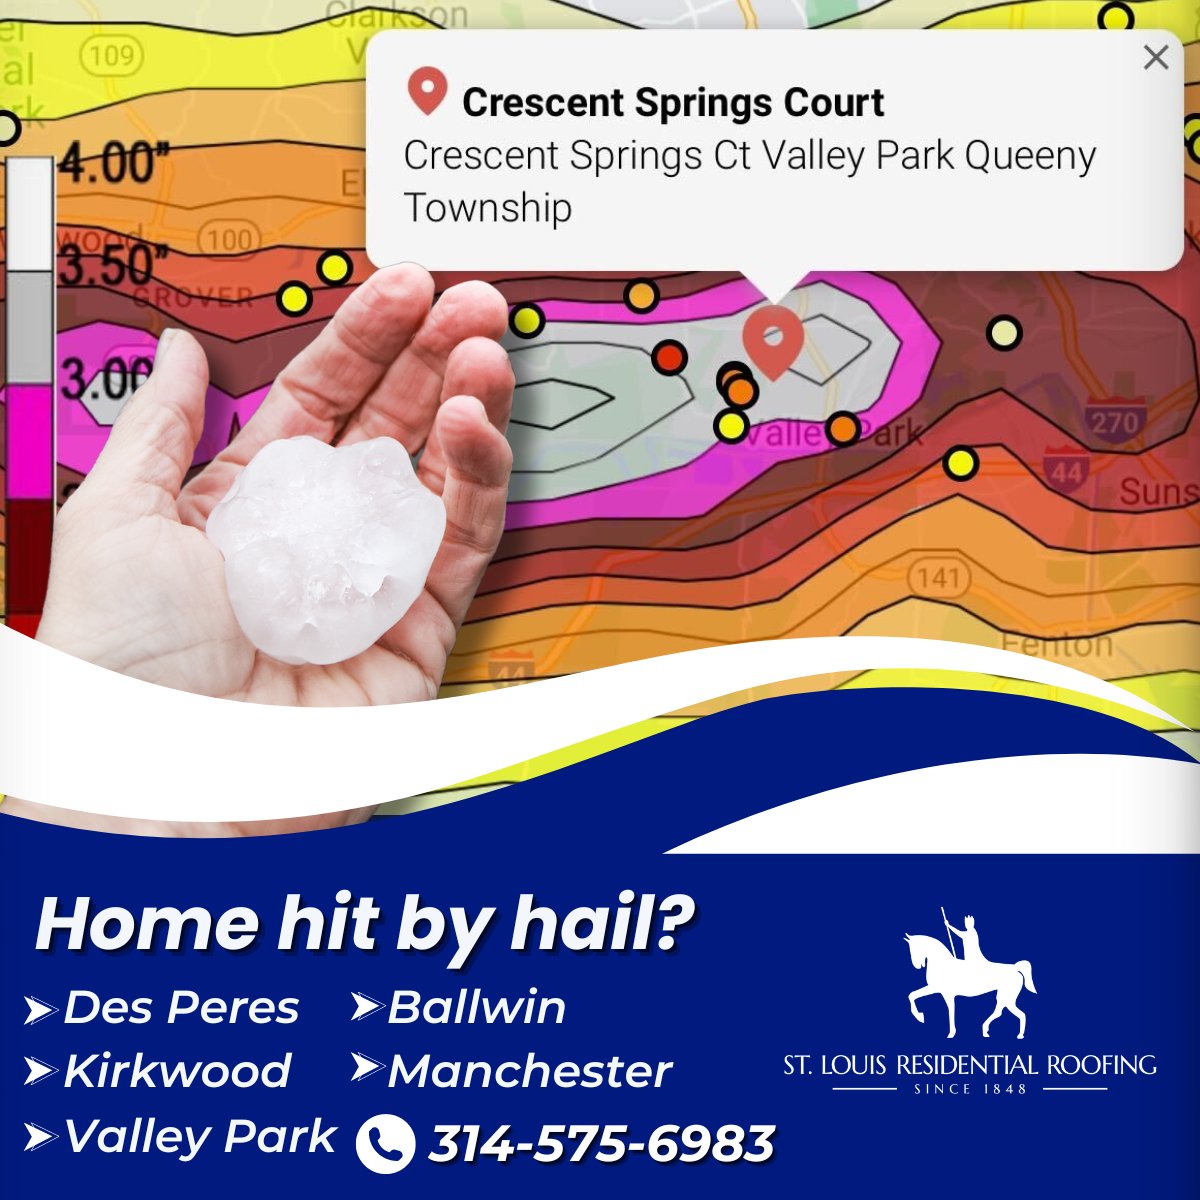 If your home was hit by hail, give us a call today!

#haildamage #YourRoofMadeSimple #ResidentialRoofing #RoofingExperts #STLRoofing